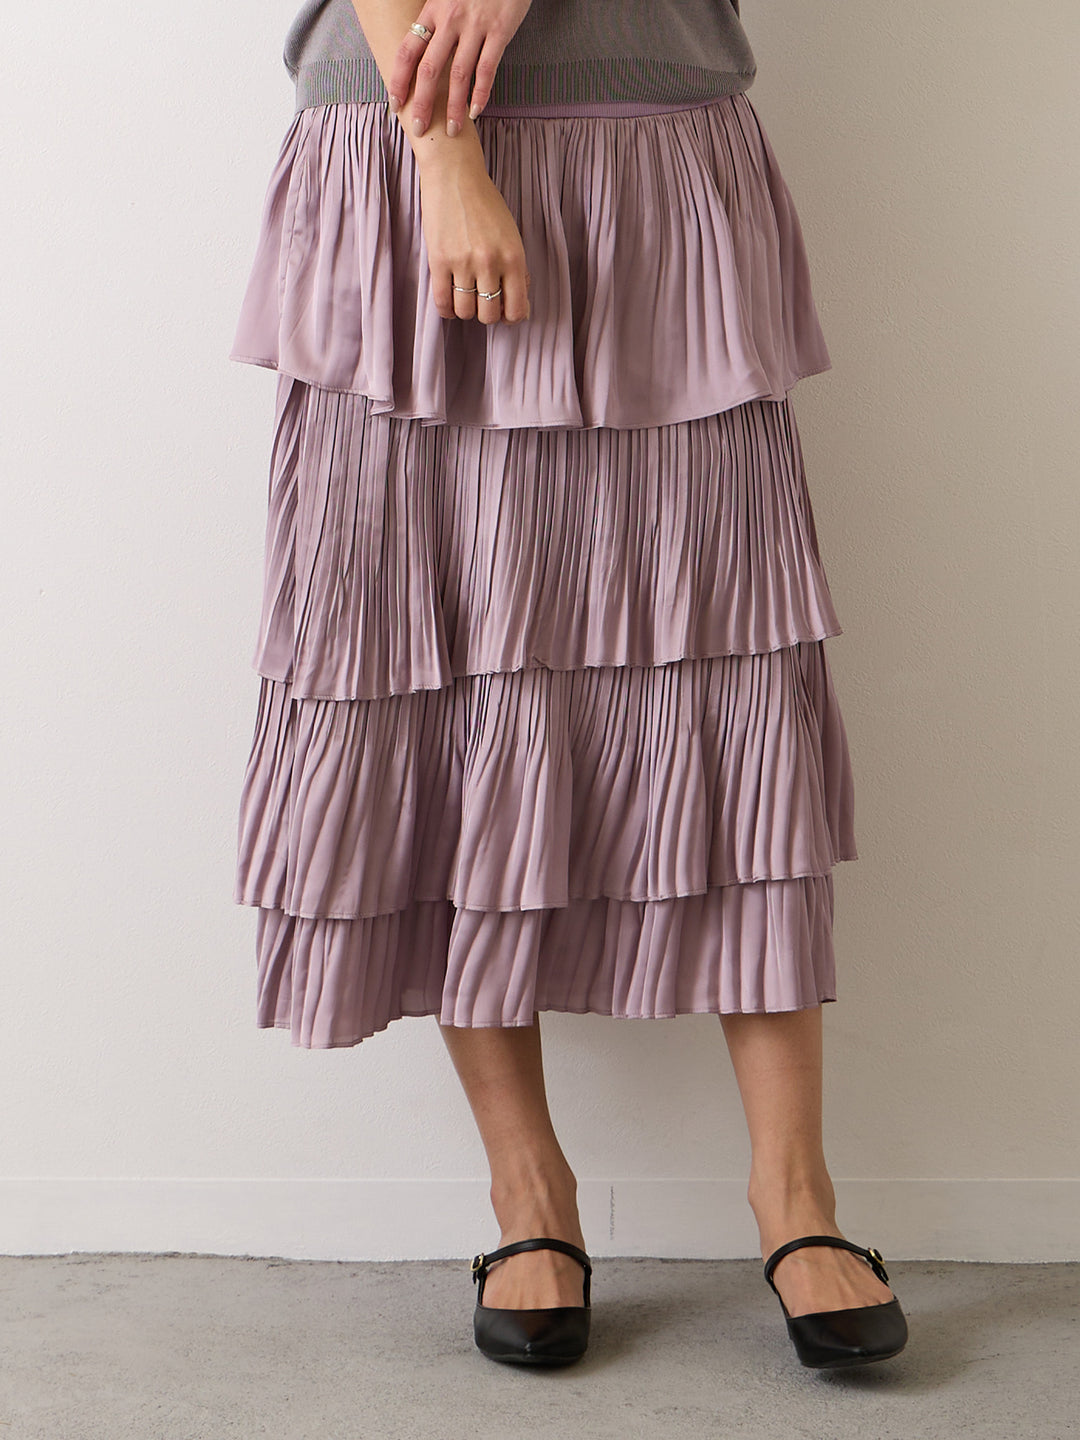 [Maternity clothes] Shiny pleated skirt with a cute luster and volume Purple